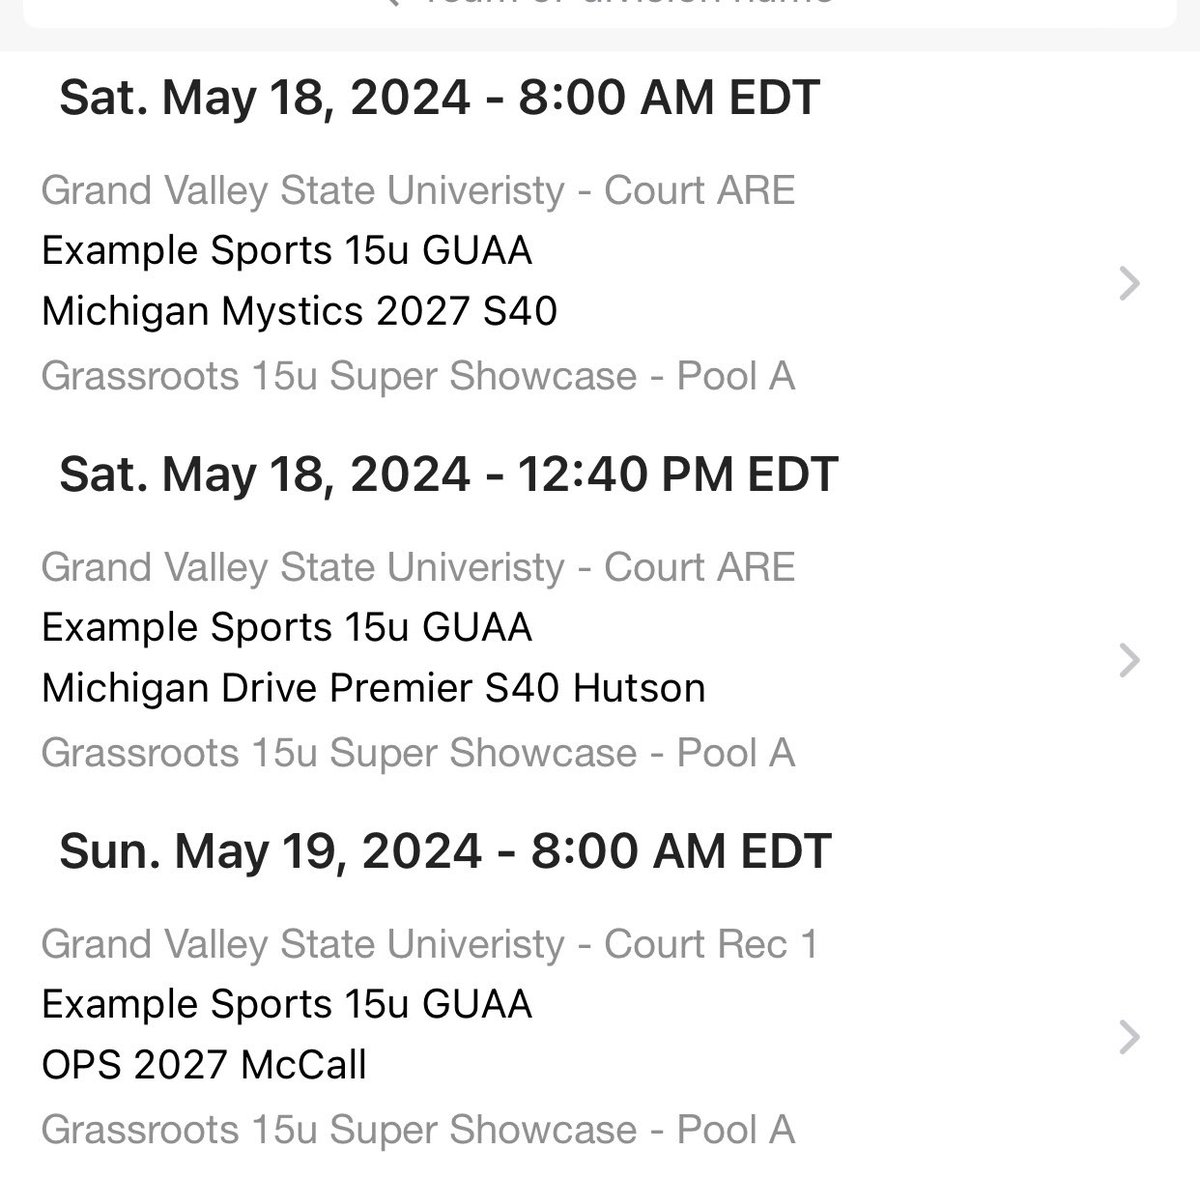 My schedule for this weekend in Michigan is below. @ExampleSports3